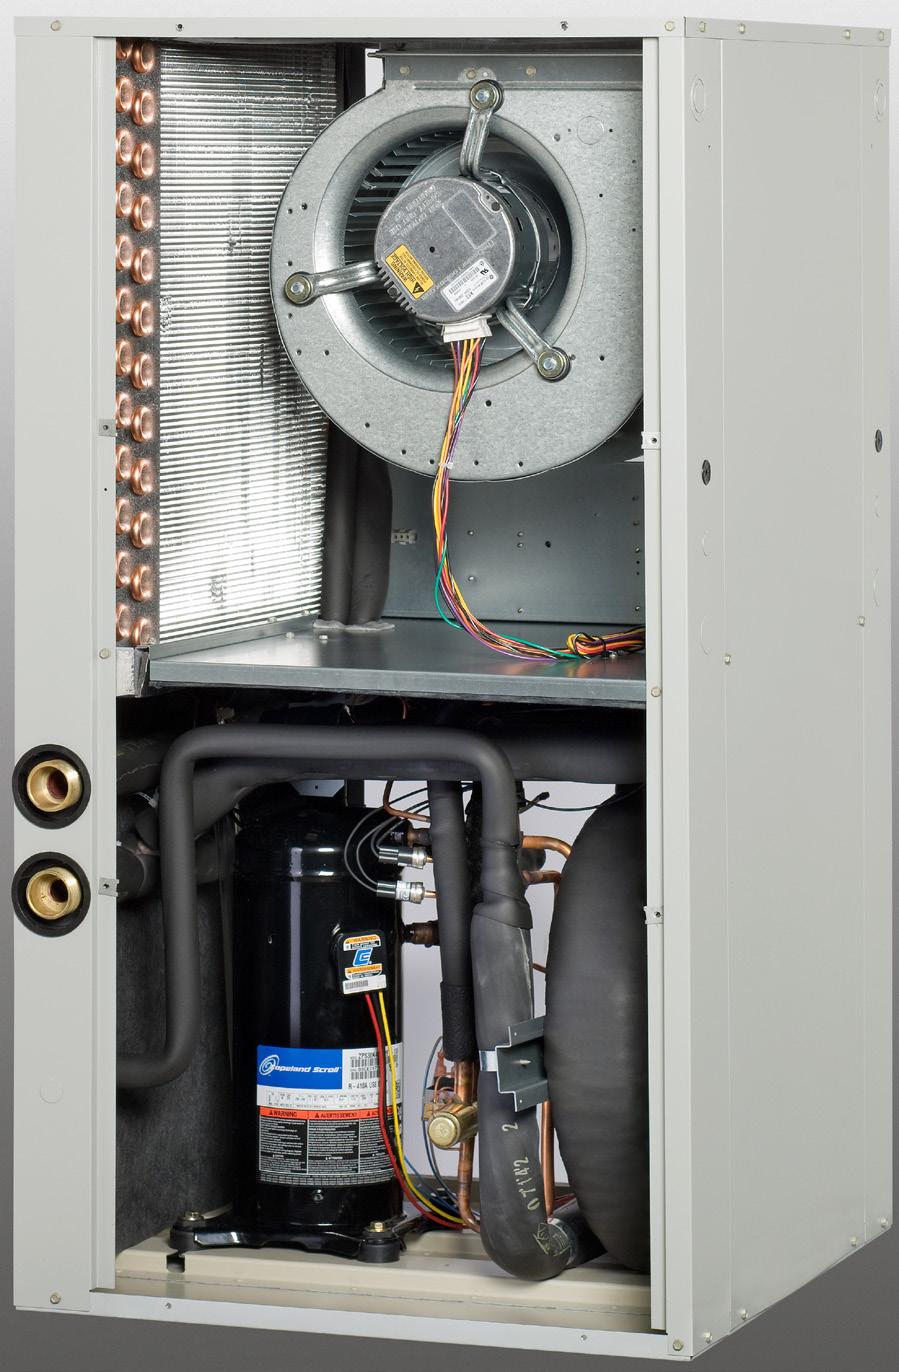 External Service Ports Both upper and lower section access panels removed for easy access to all components.